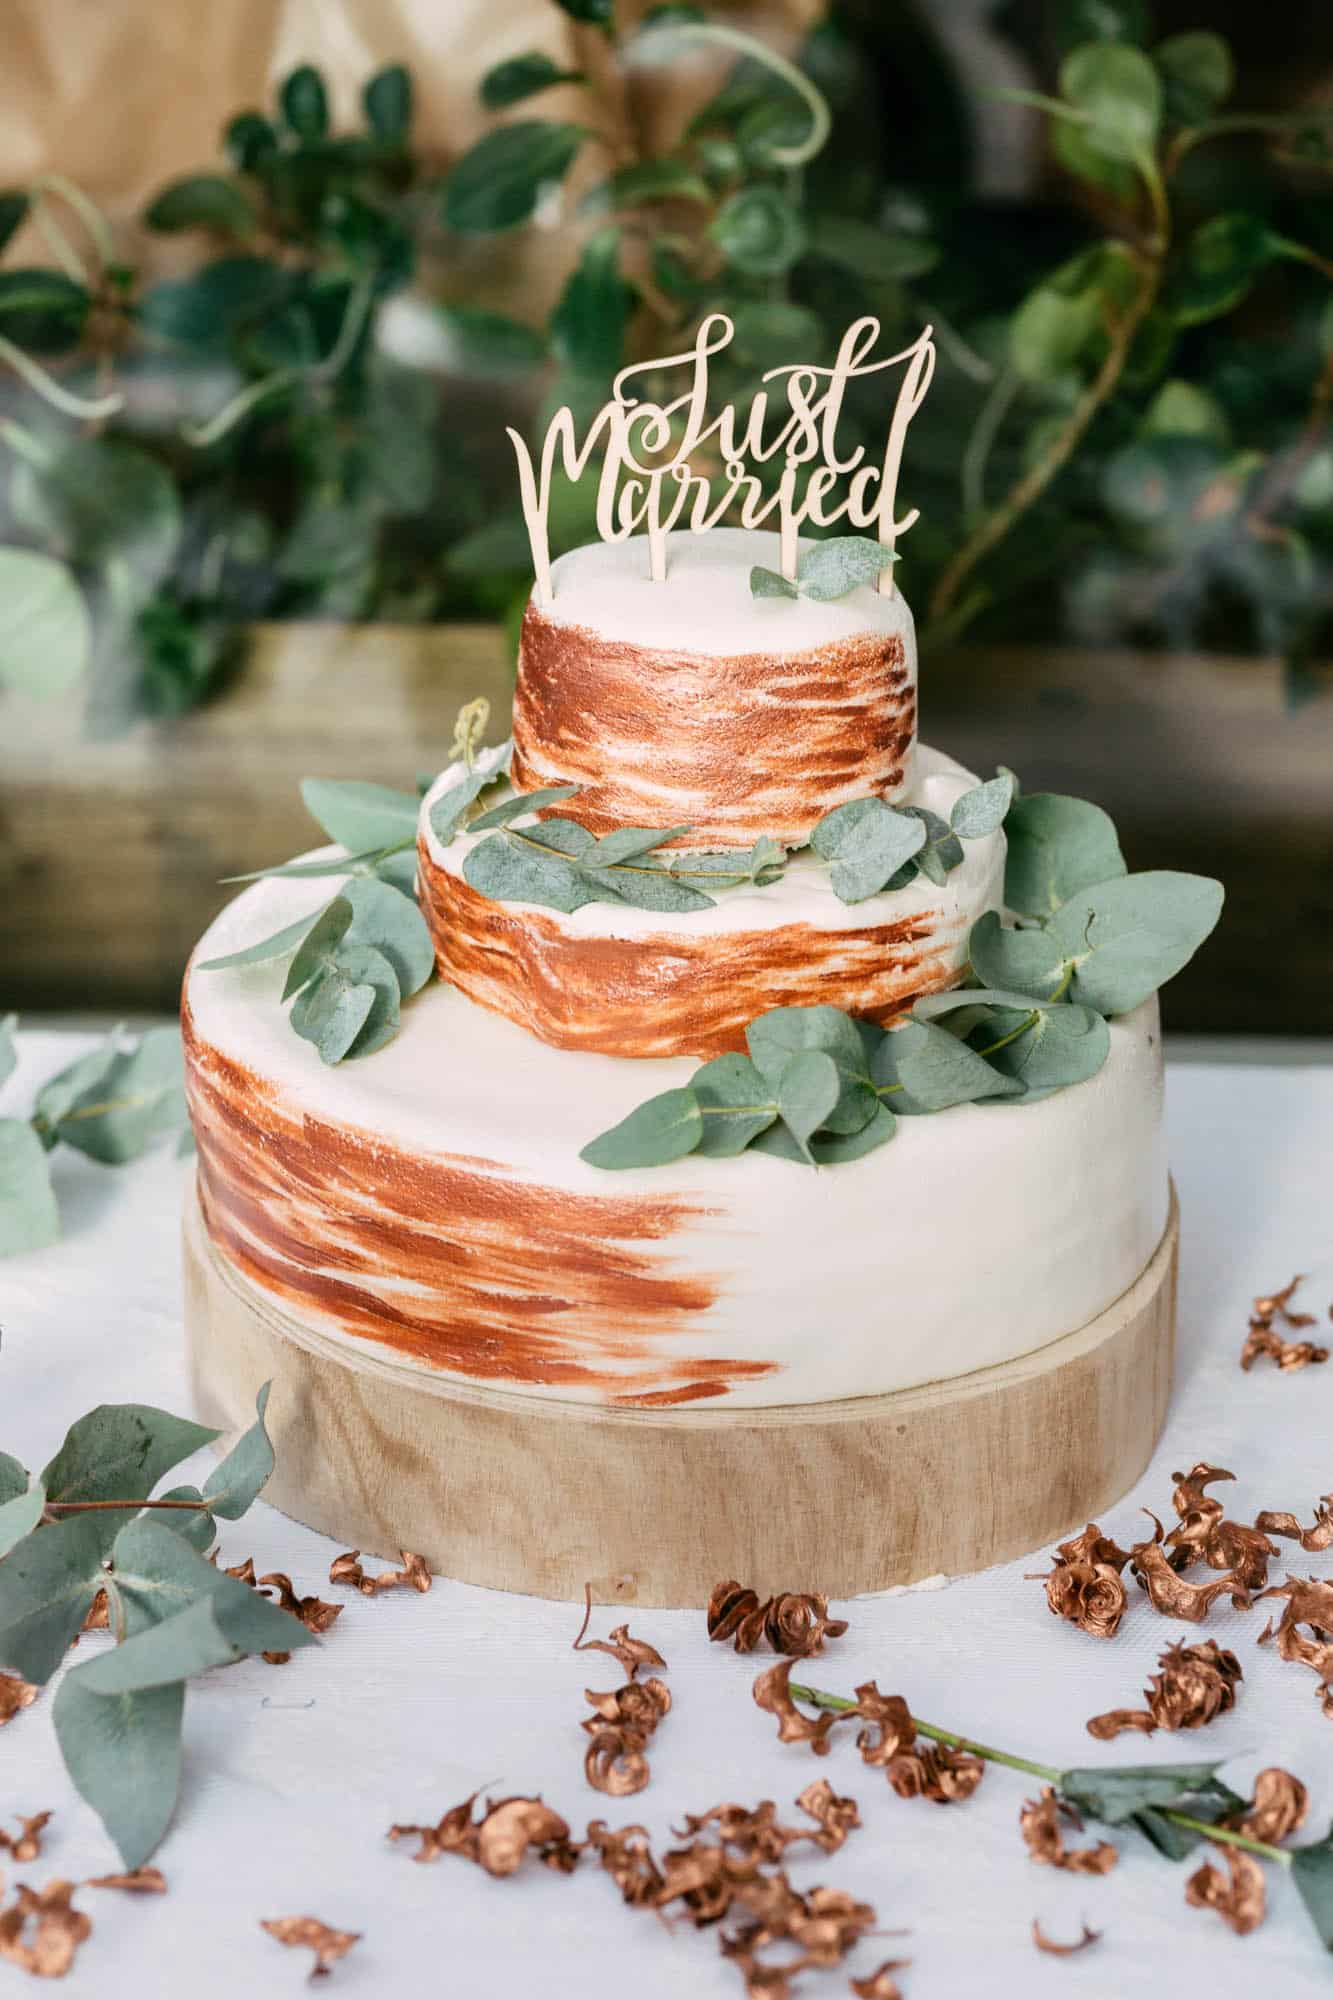 A wedding cake with eucalyptus leaves above it.